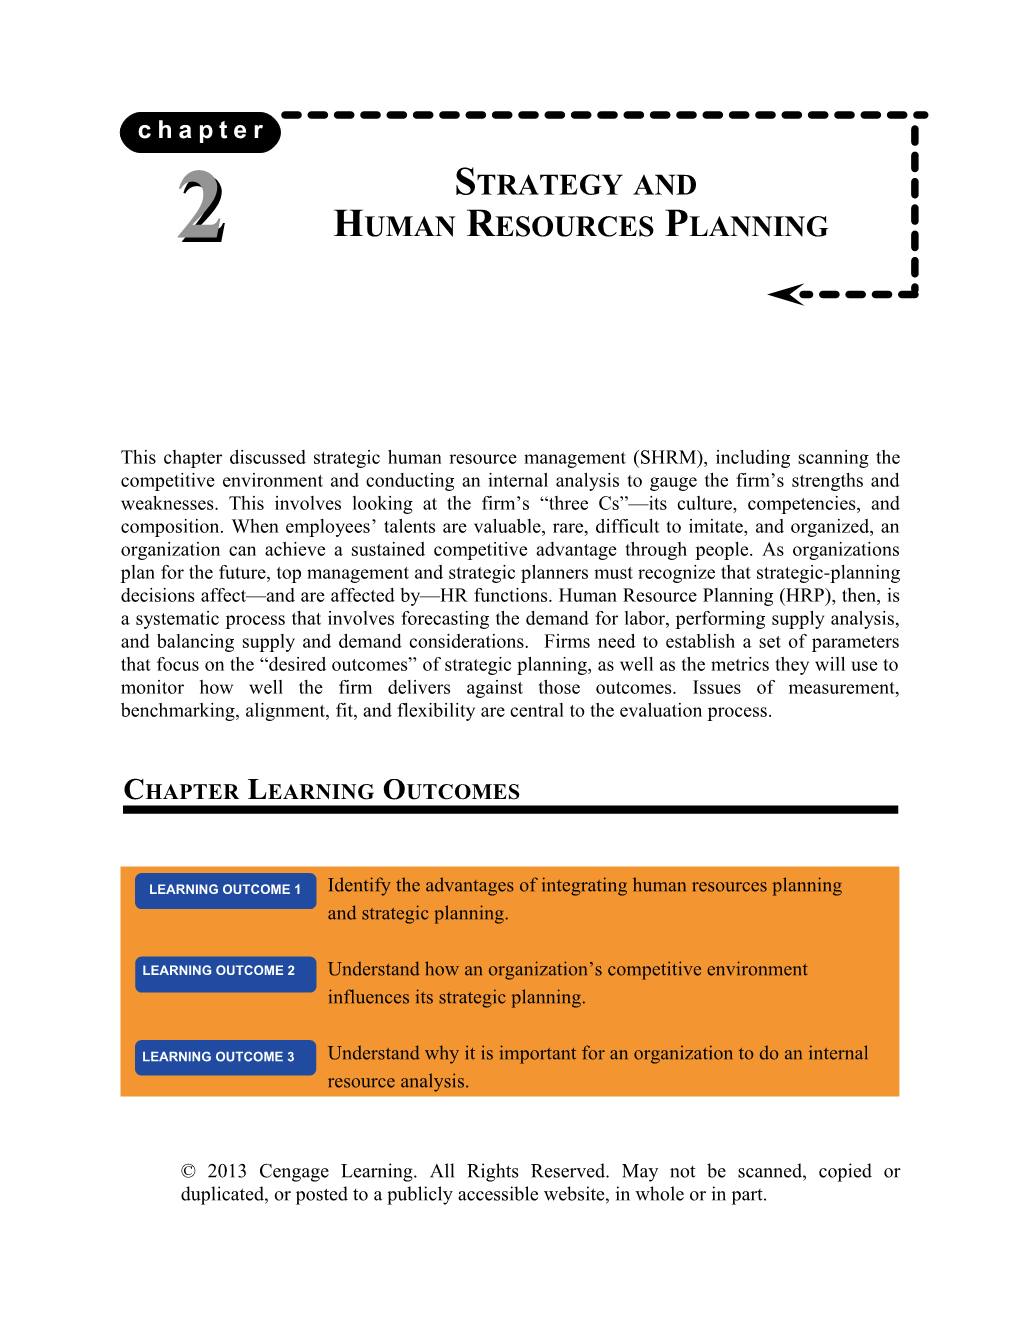 Strategy and Human Resources Planning